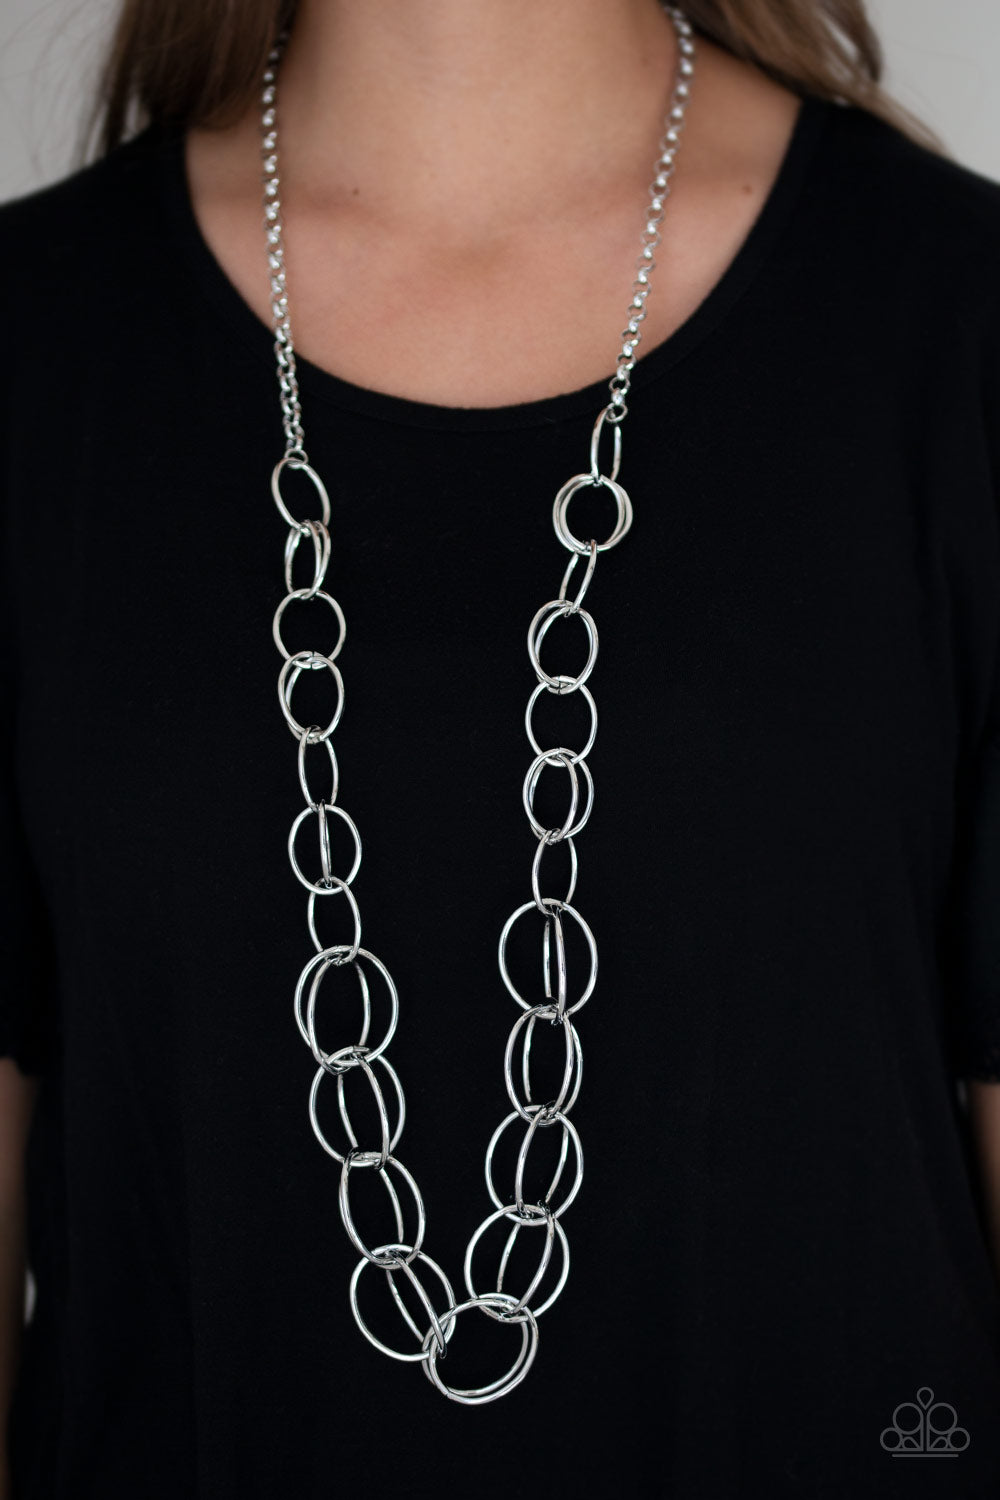 Paparazzi Elegantly Ensnared - Silver - Necklace and matching Earrings - $5 Jewelry With Ashley Swint